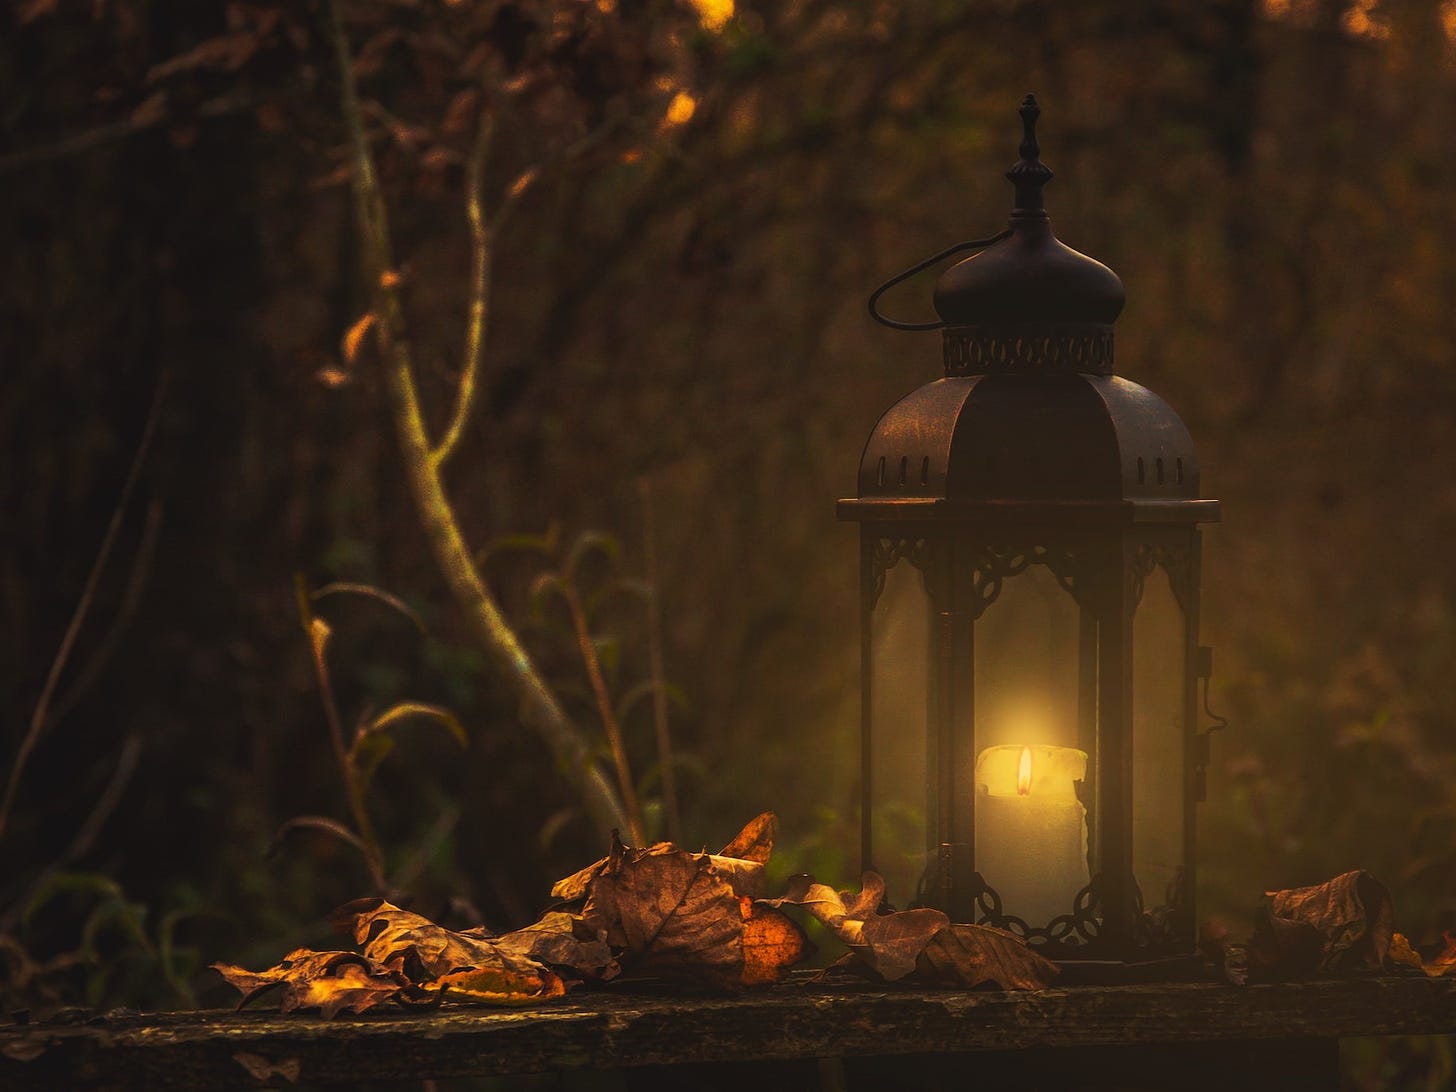 Image is a photo of a candle-lit lantern sitting atop a stone ledge surrounded by crunchy autumn leaves 